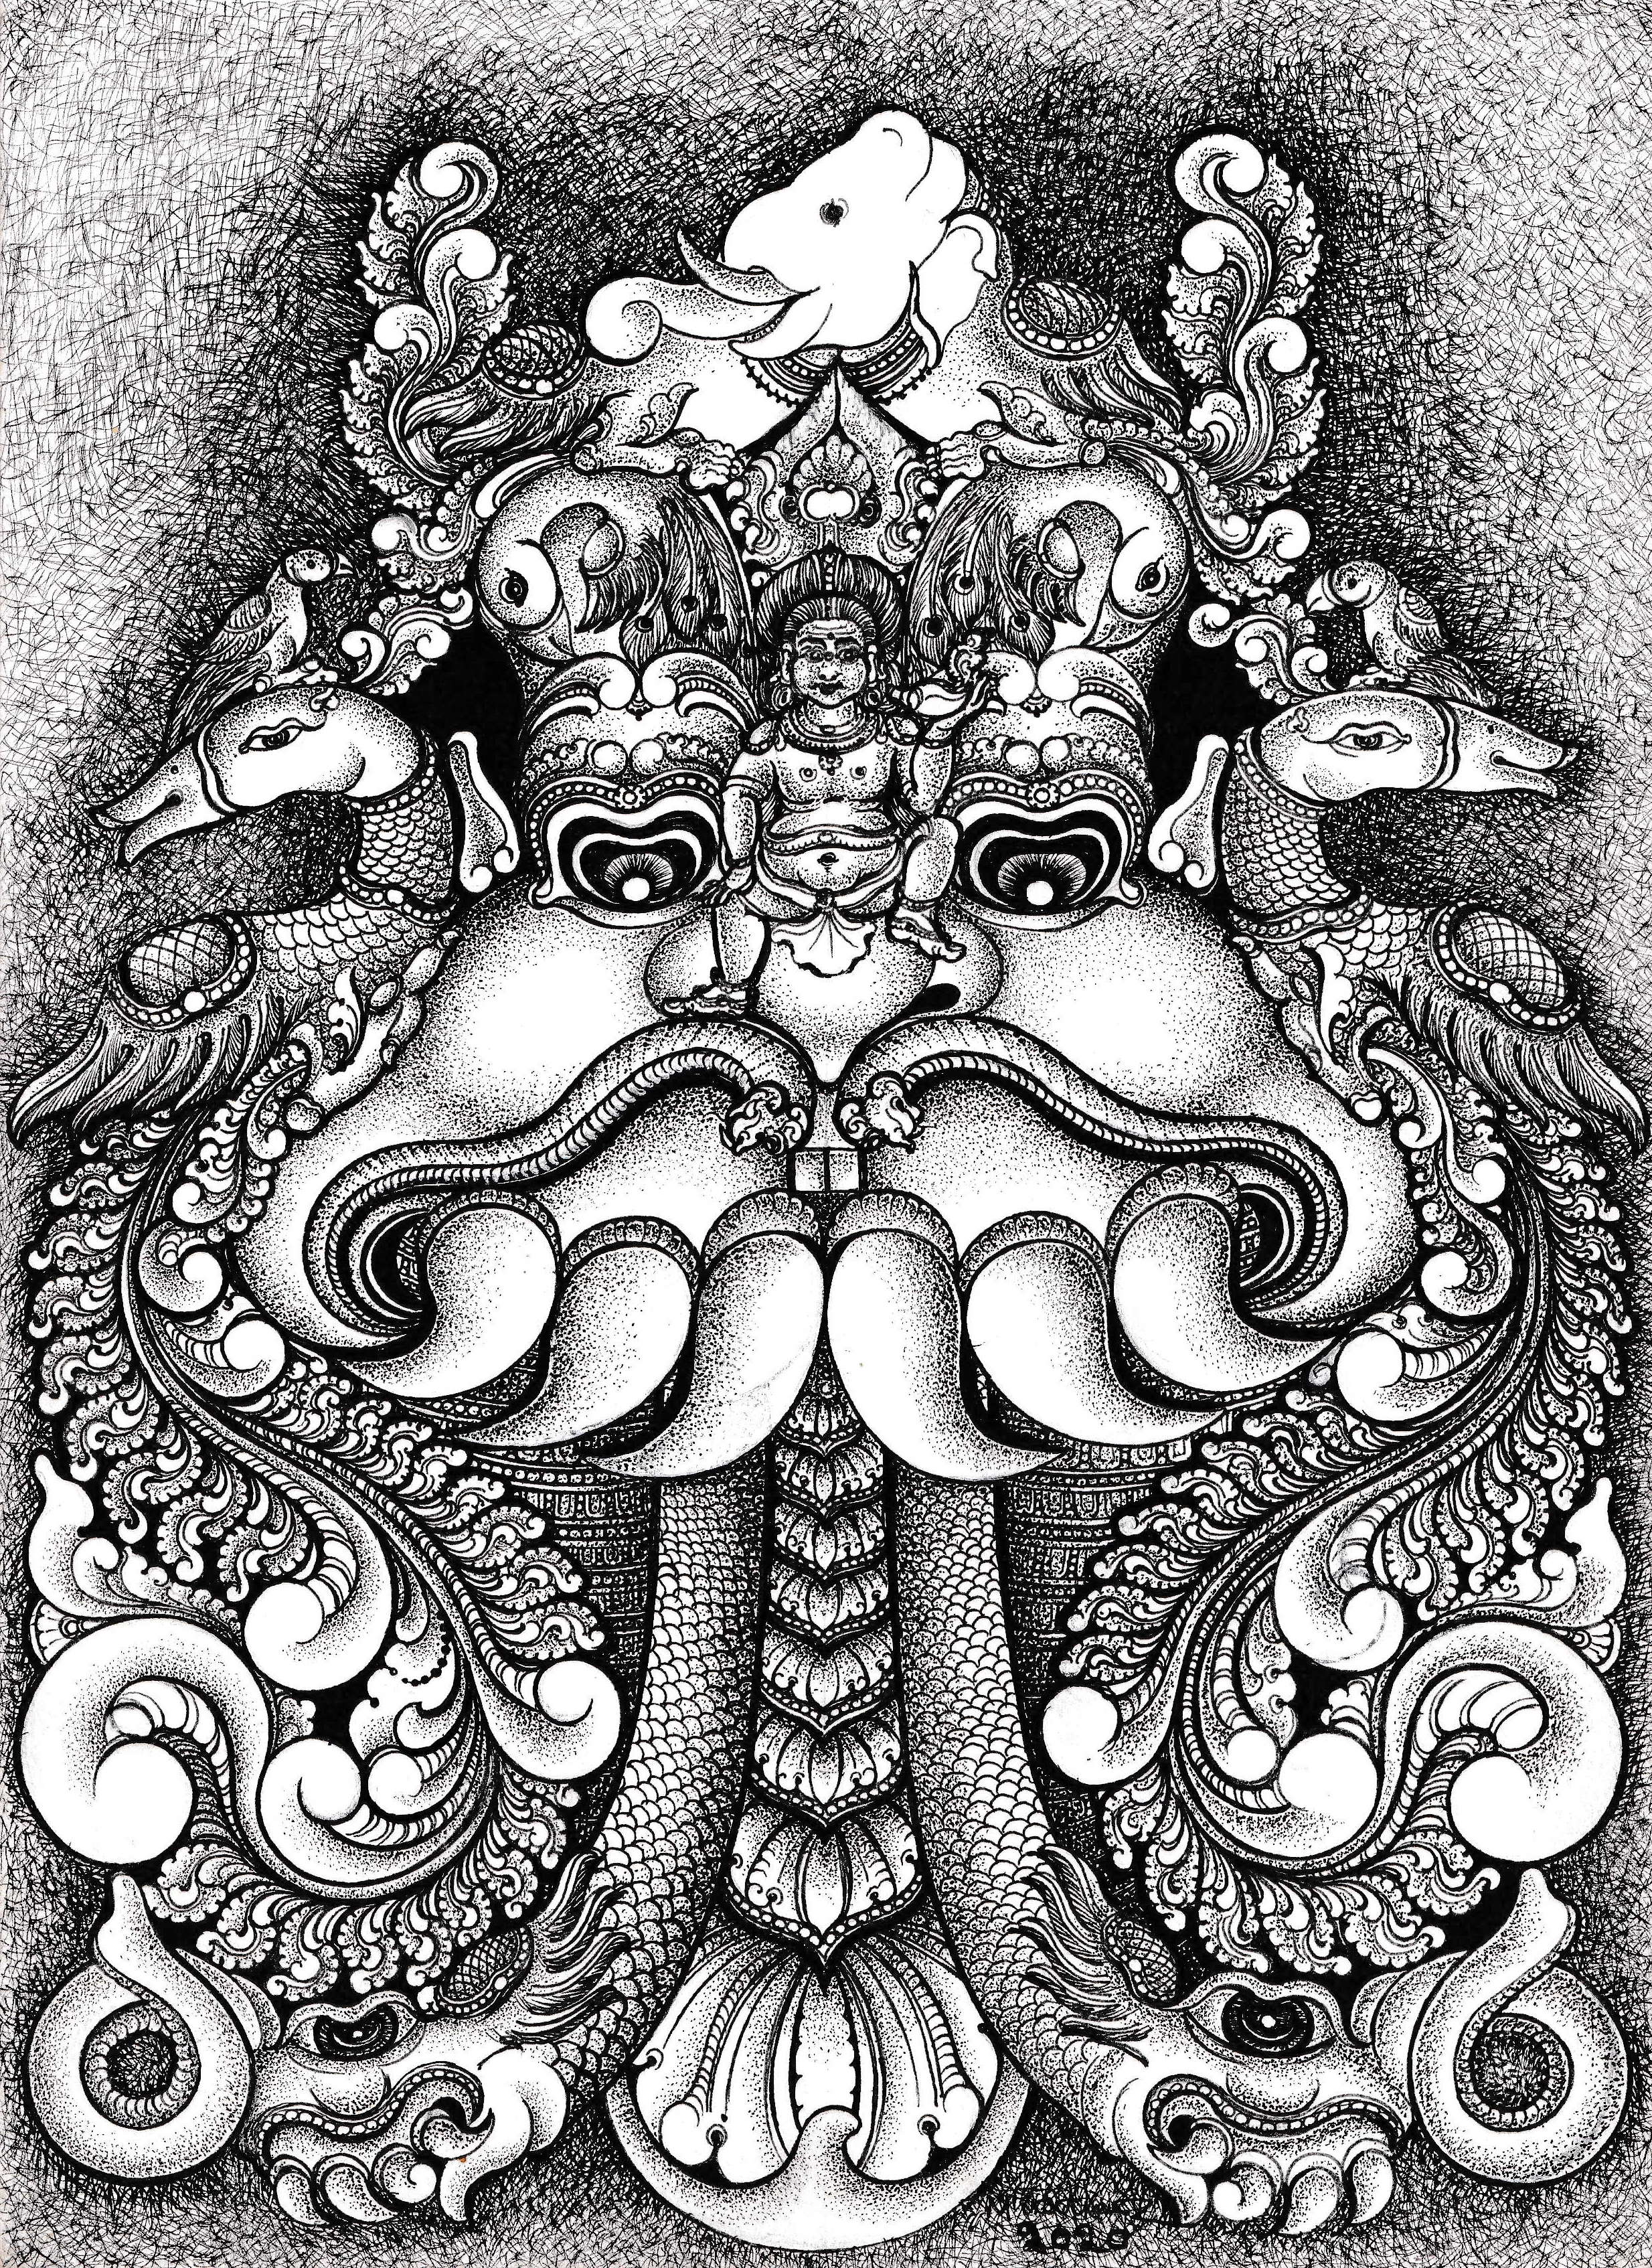 Manrique Conscious Art And Tattoo on Tumblr: A drawing a day to keep my  demons away :) working on a Kirtimukha, Garuda's older brother, protector  of Shiva's door and so...